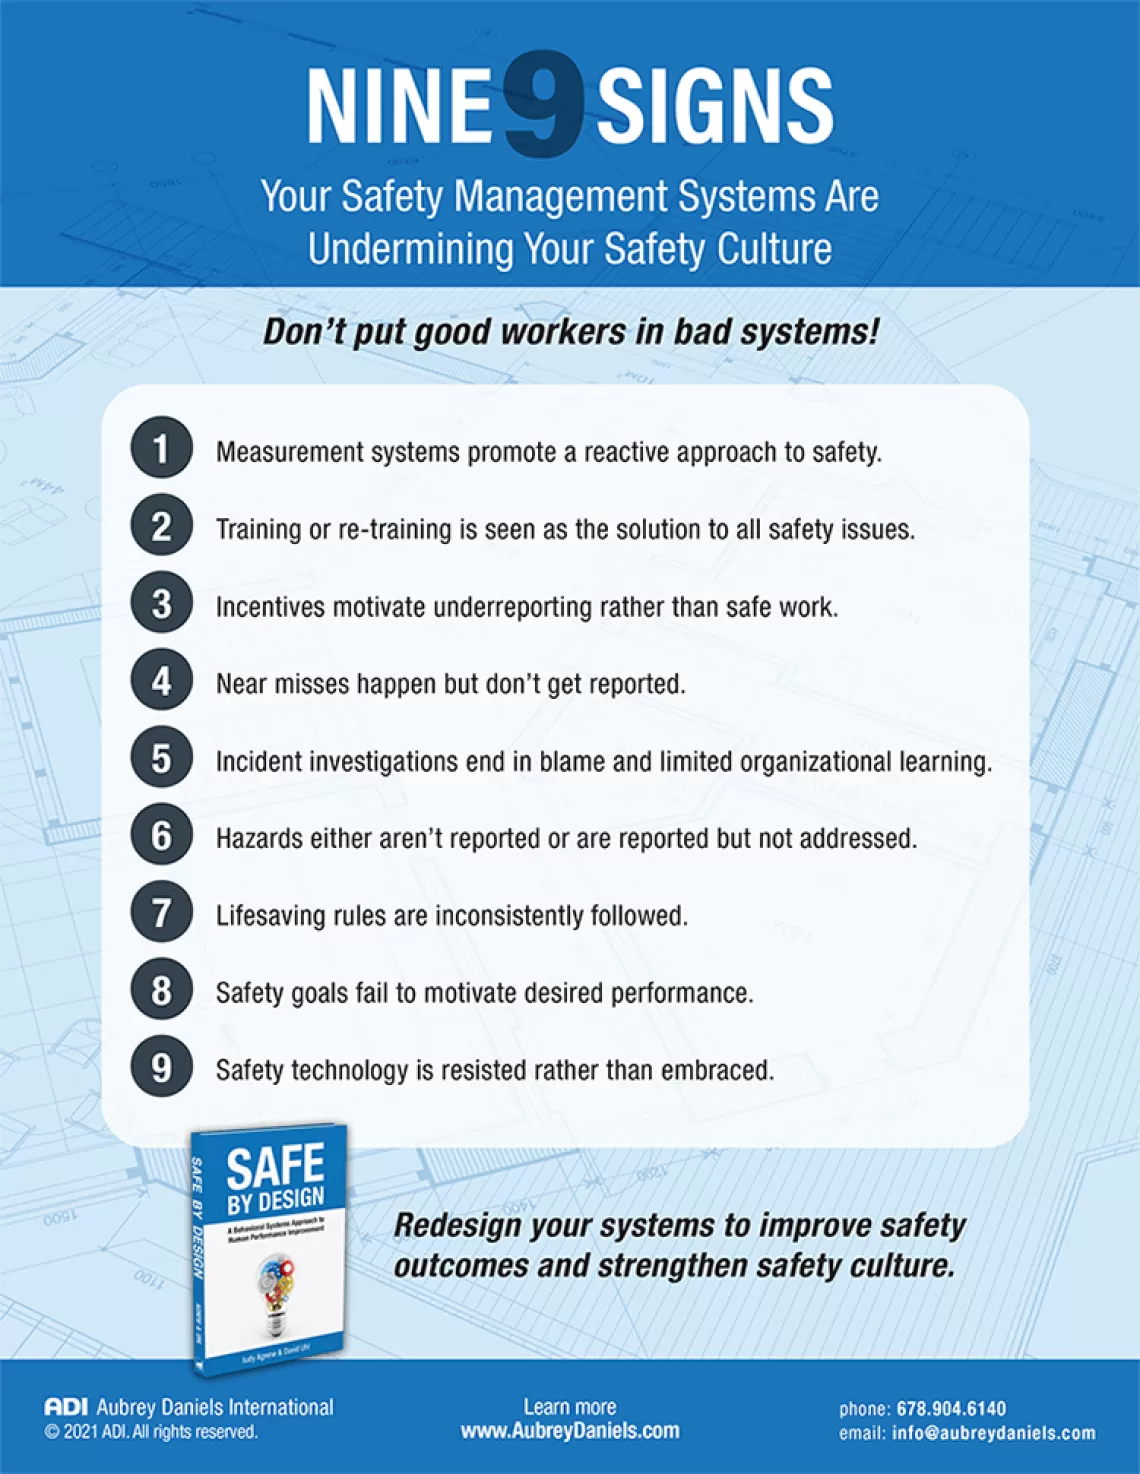 9 Signs Your Safety Management Systems Are Undermining Your Safety Culture